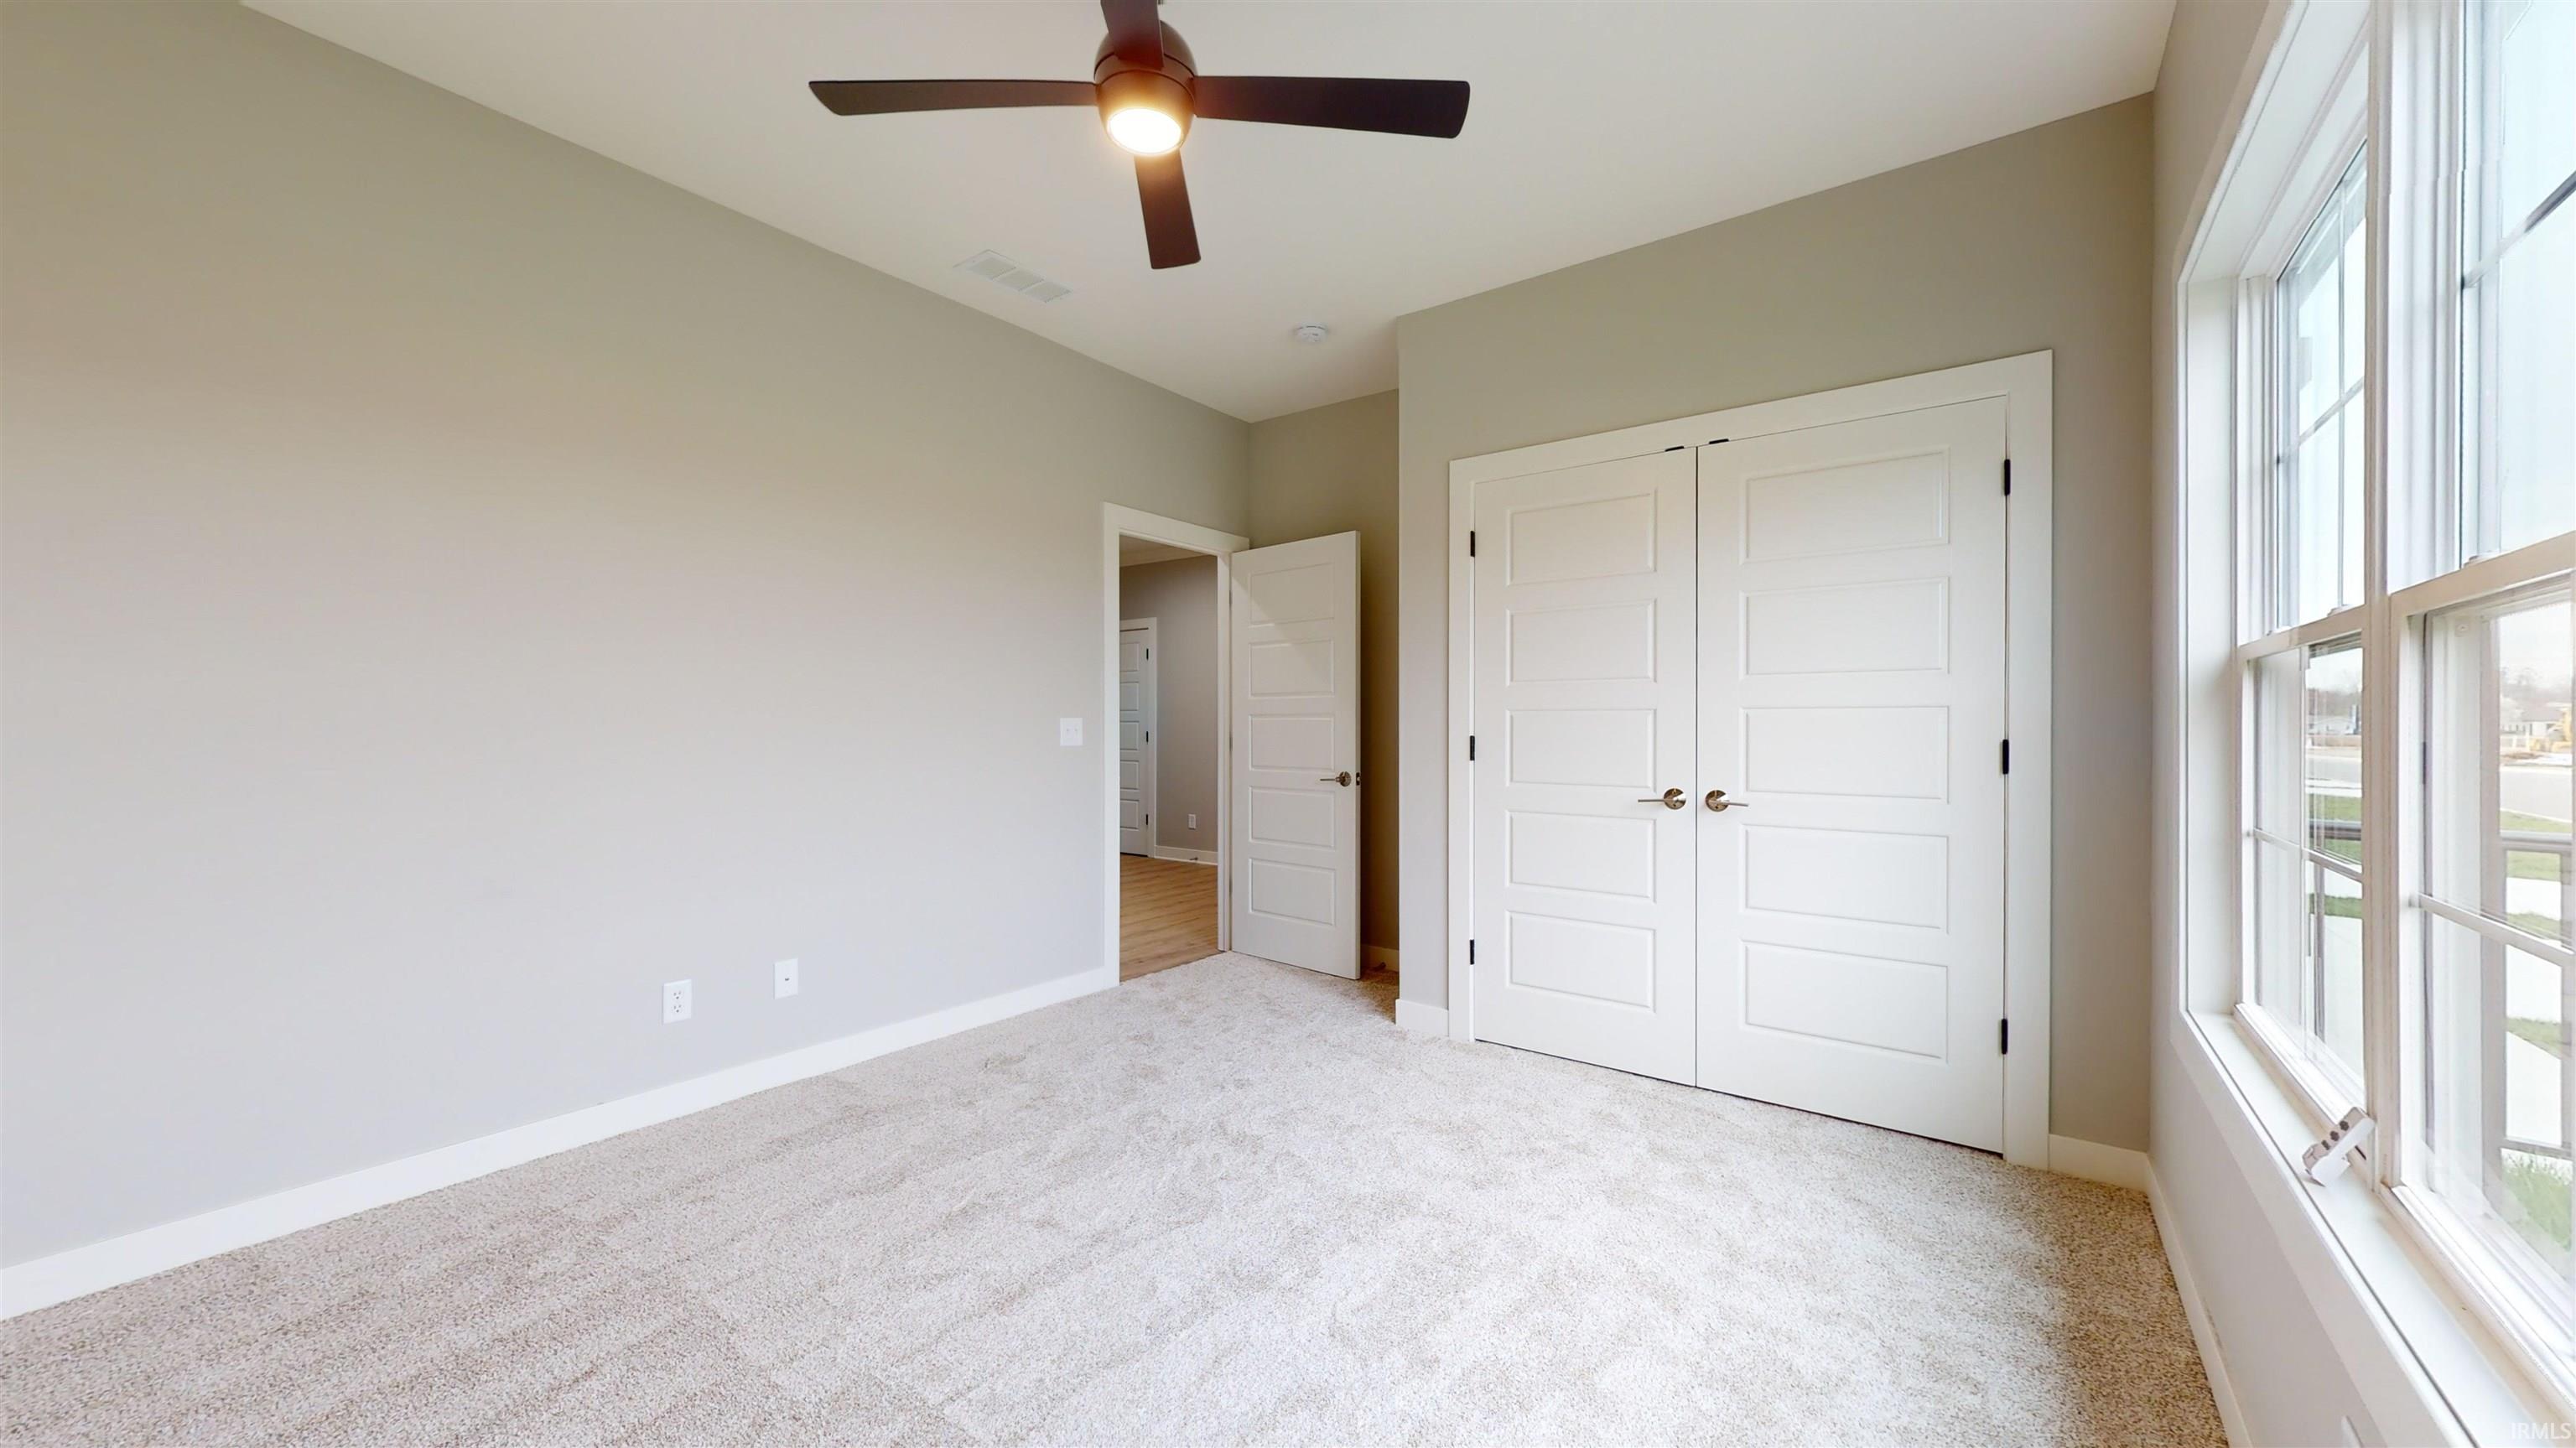 Each unit's garage comes with an 8' tall overhead garage door, which is 1' taller than standard overhead doors.